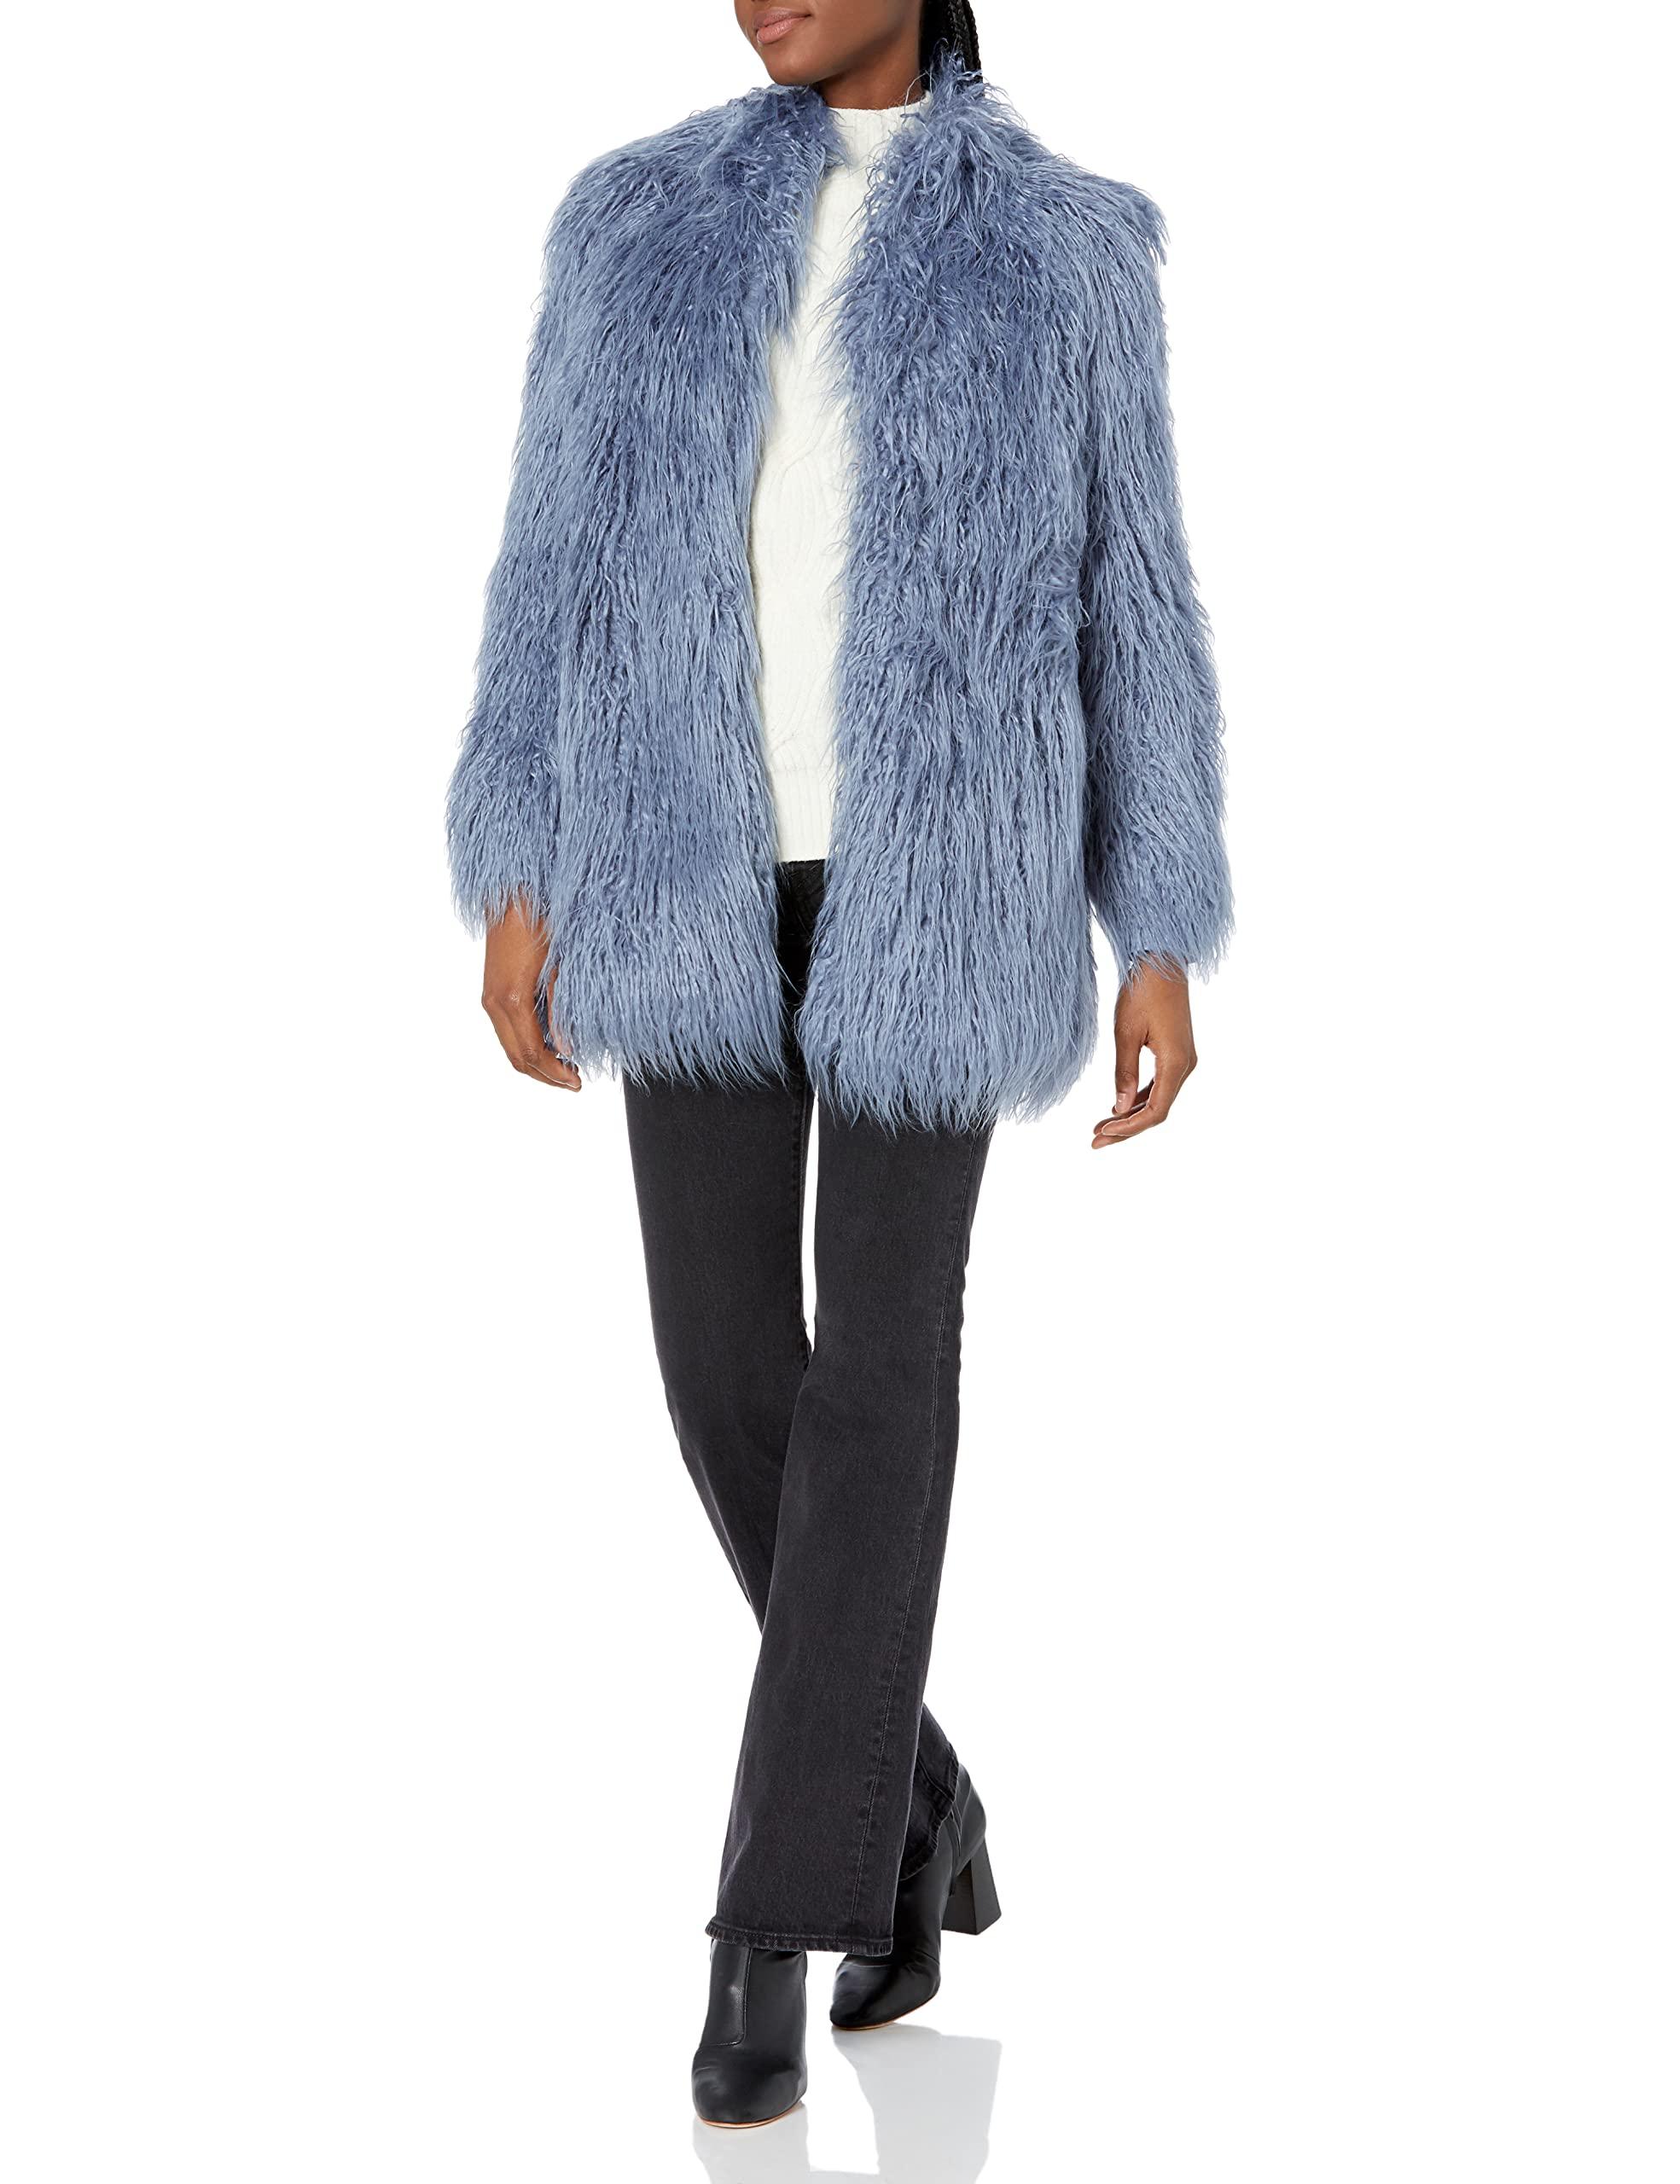 Guess Long Sleeve Maurizia Faux Fur Coat in Blue | Lyst